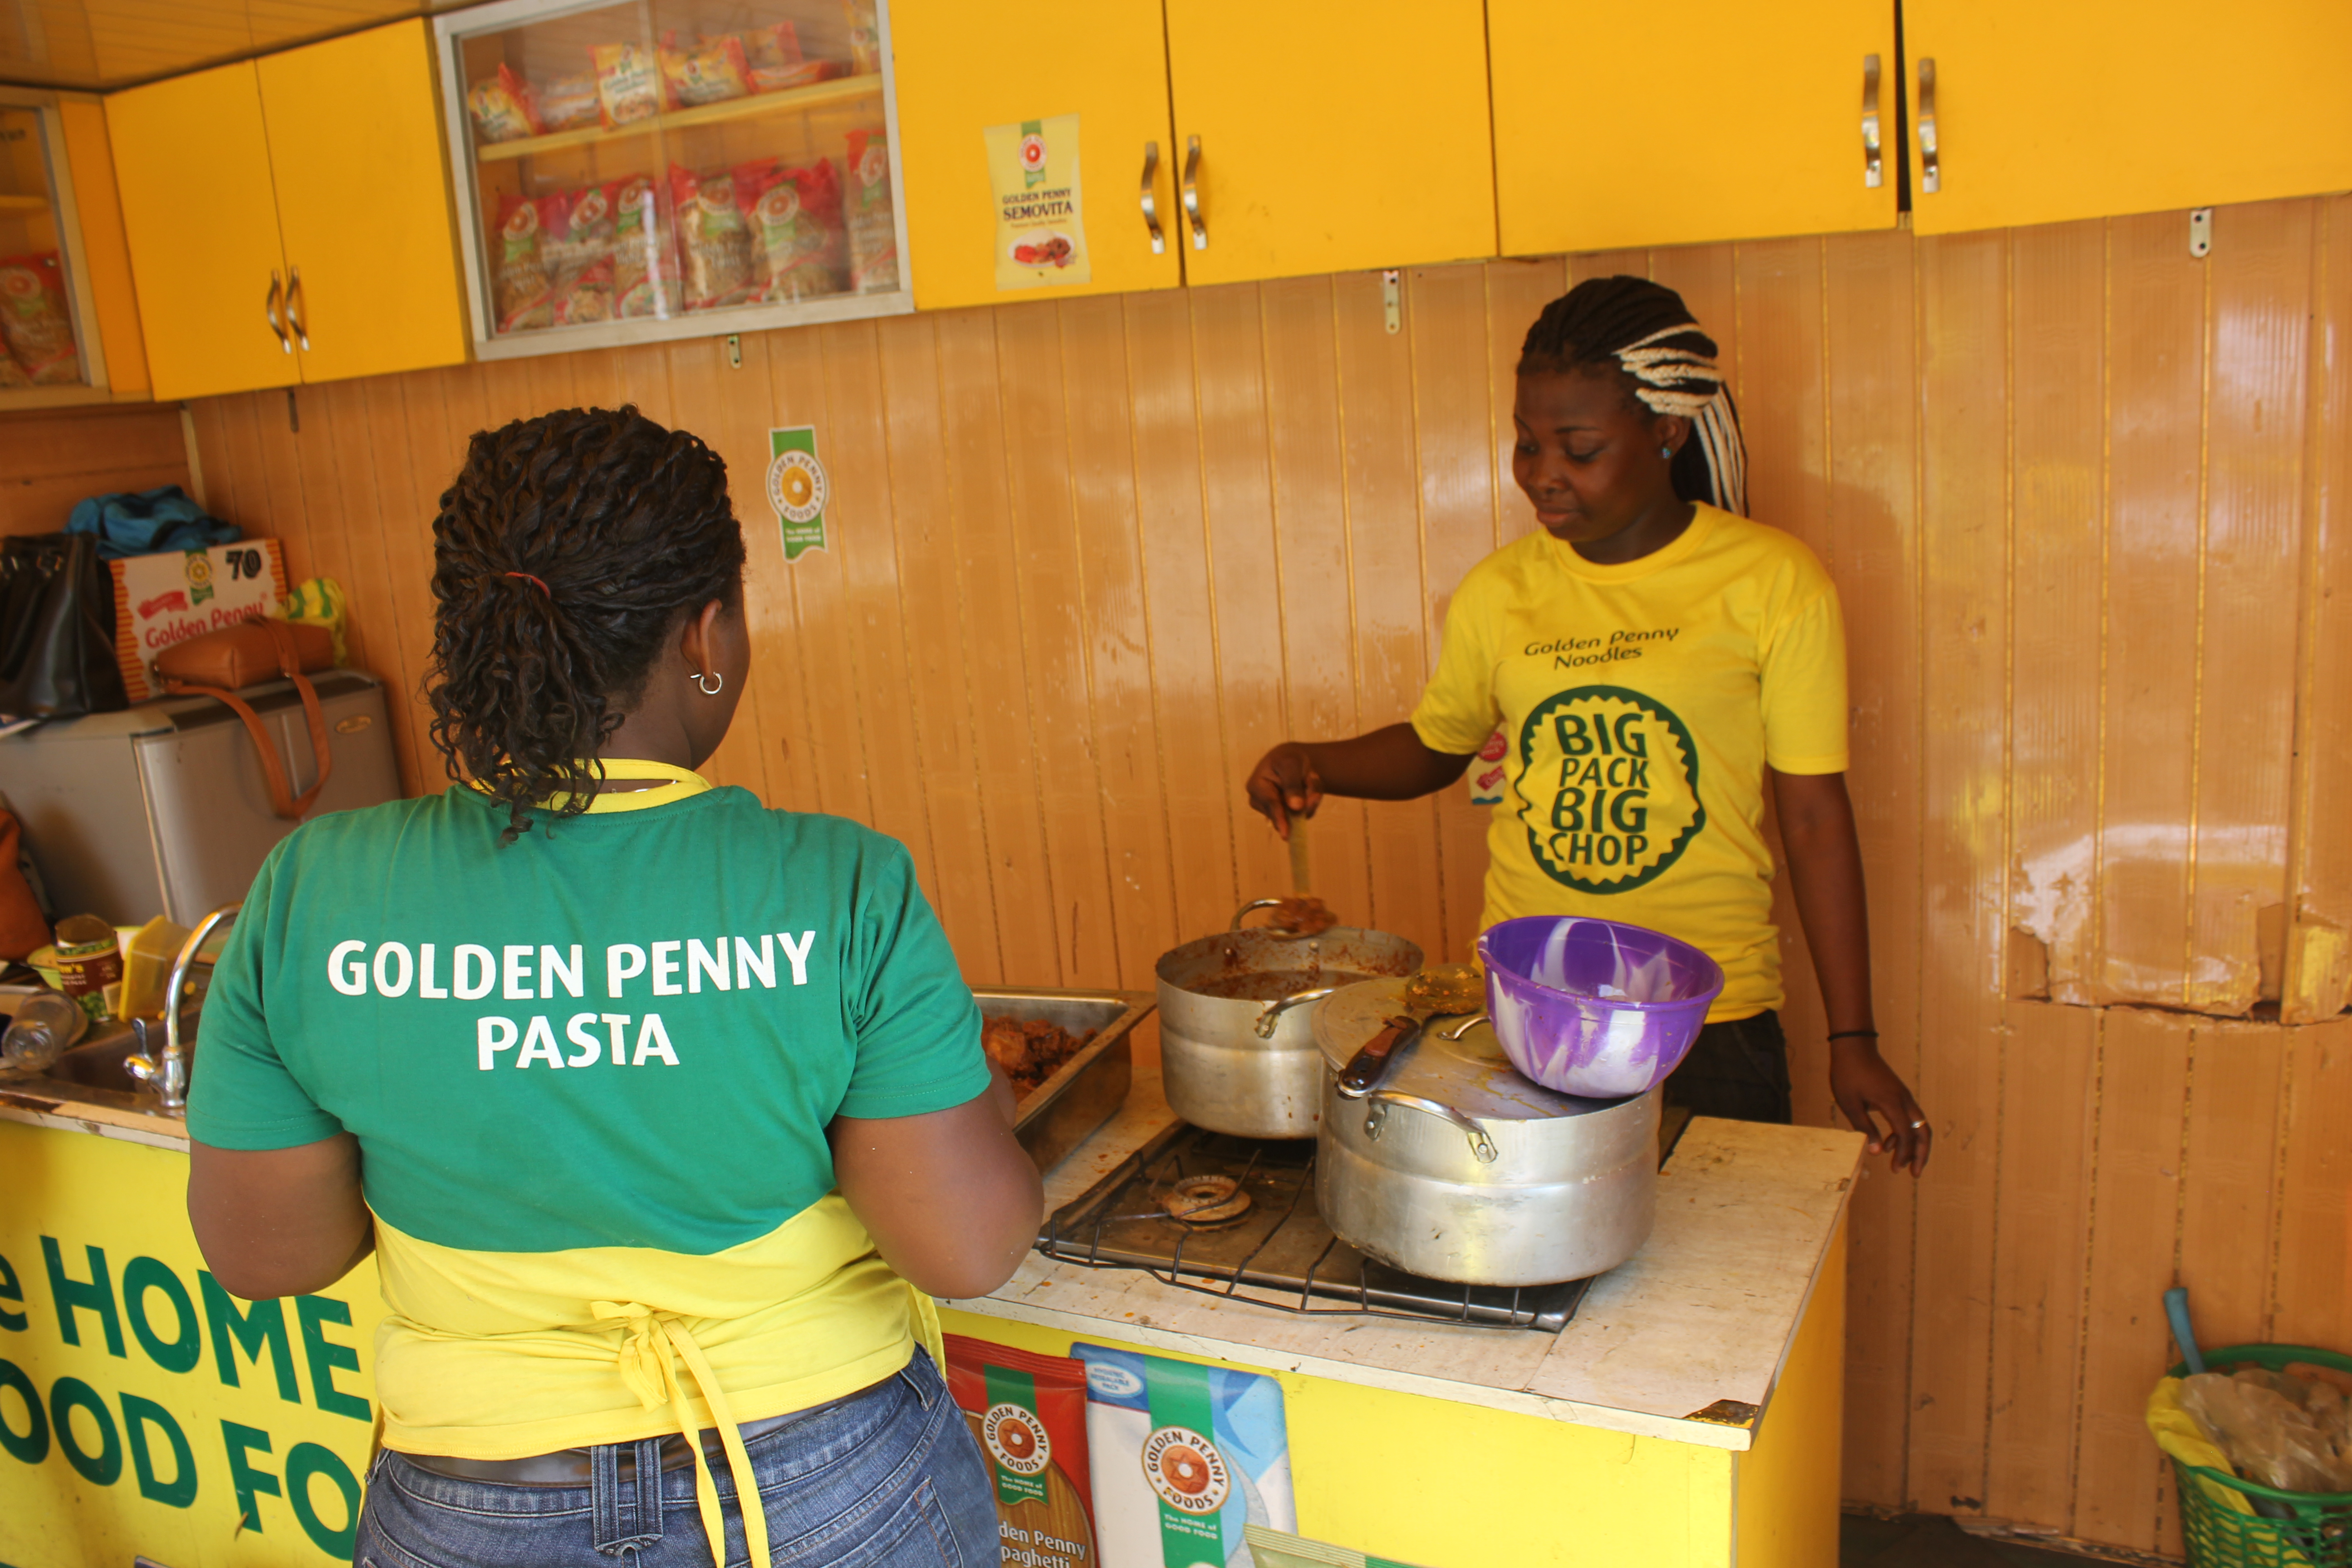 FLOUR MILLS OF NIGERIA SETS UP A MOBILE KITCHEN AT THE EVENT!